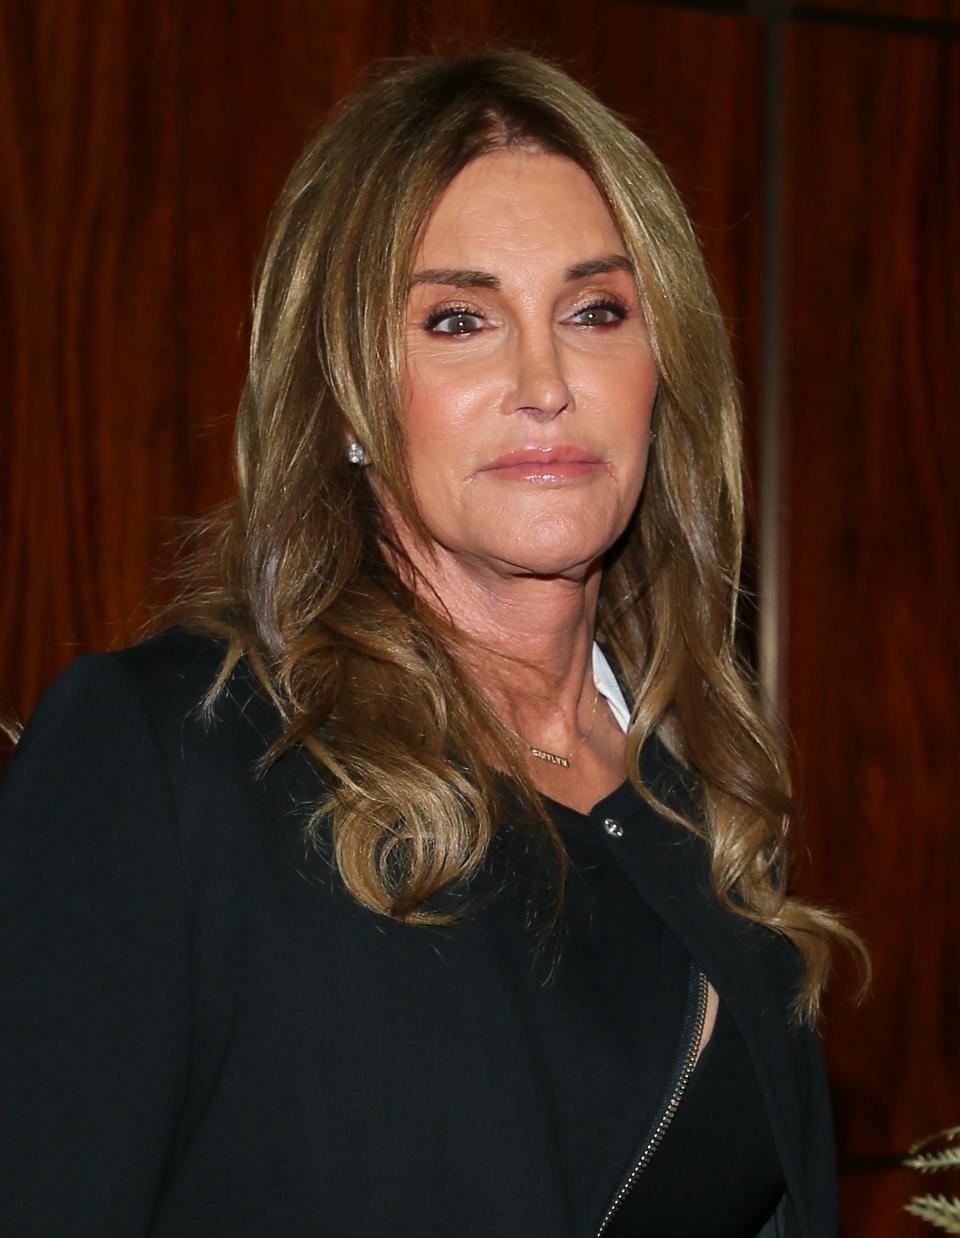 Glamour magazined honored Caitlyn Jenner with an award at its annual Glamour Women of the Year event -- and she, in turn, <a href="http://www.glamour.com/inspired/women-of-the-year/2015/caitlyn-jenner">said some truly lovely things </a>about her hope to make a difference in the world by living authentically. Then a man whose wife died in the 9/11 attacks and who had been honored by the magazine for helping people escape <a href="http://www.etonline.com/news/176137_husband_of_september_11_hero_returns_glamour_woman_of_the_year_award_after_caitlyn_jenner_is_honored/">reportedly returned her award</a>, saying the magazine's choice to recognize Jenner was "insulting" to his wife's memory. Sad faces, all around.